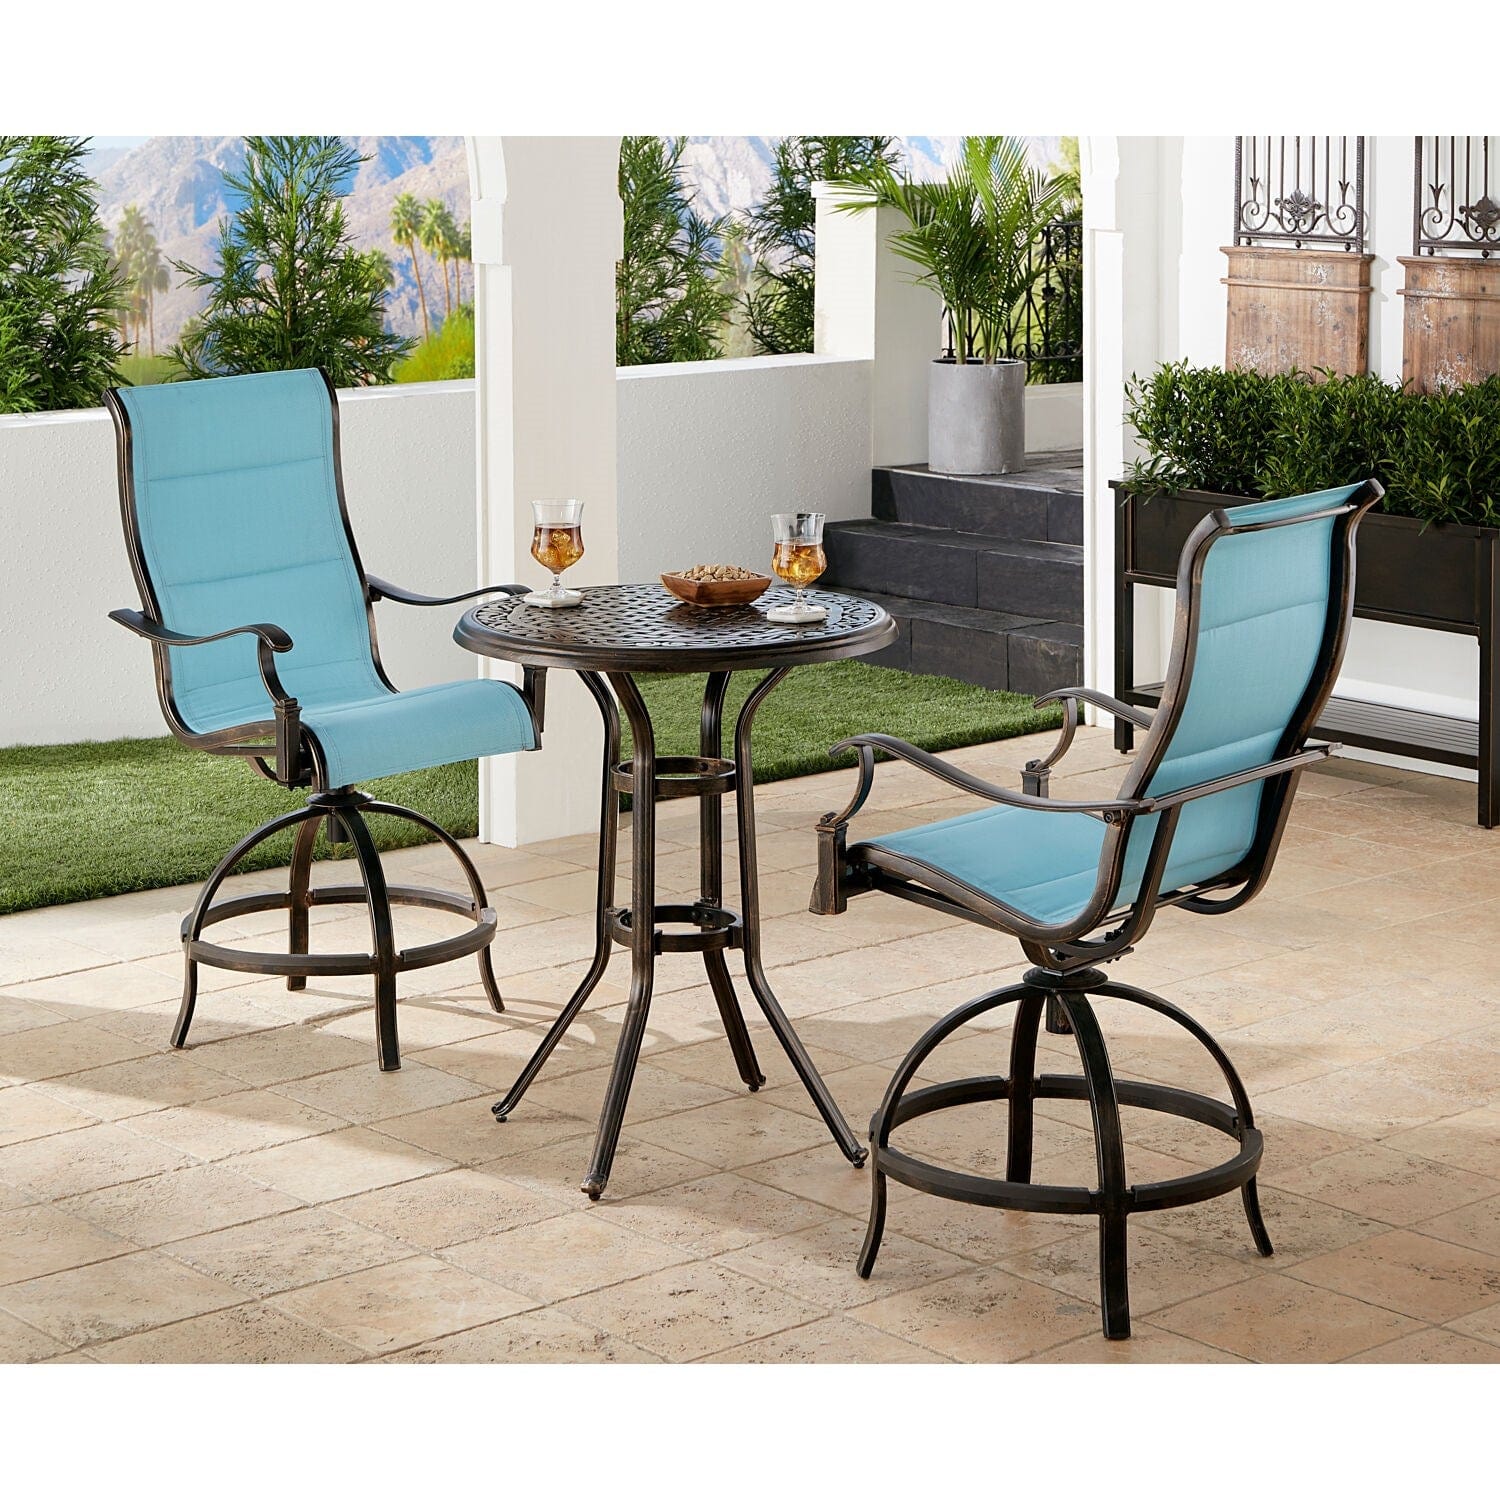 Hanover Bistro Set Hanover Traditions 3-Piece High-Dining Bistro Set in Blue with 2 Padded Swivel Counter-Height Chairs and 30-in. Cast-top Table - TRADDN3PCPDBR-BLU